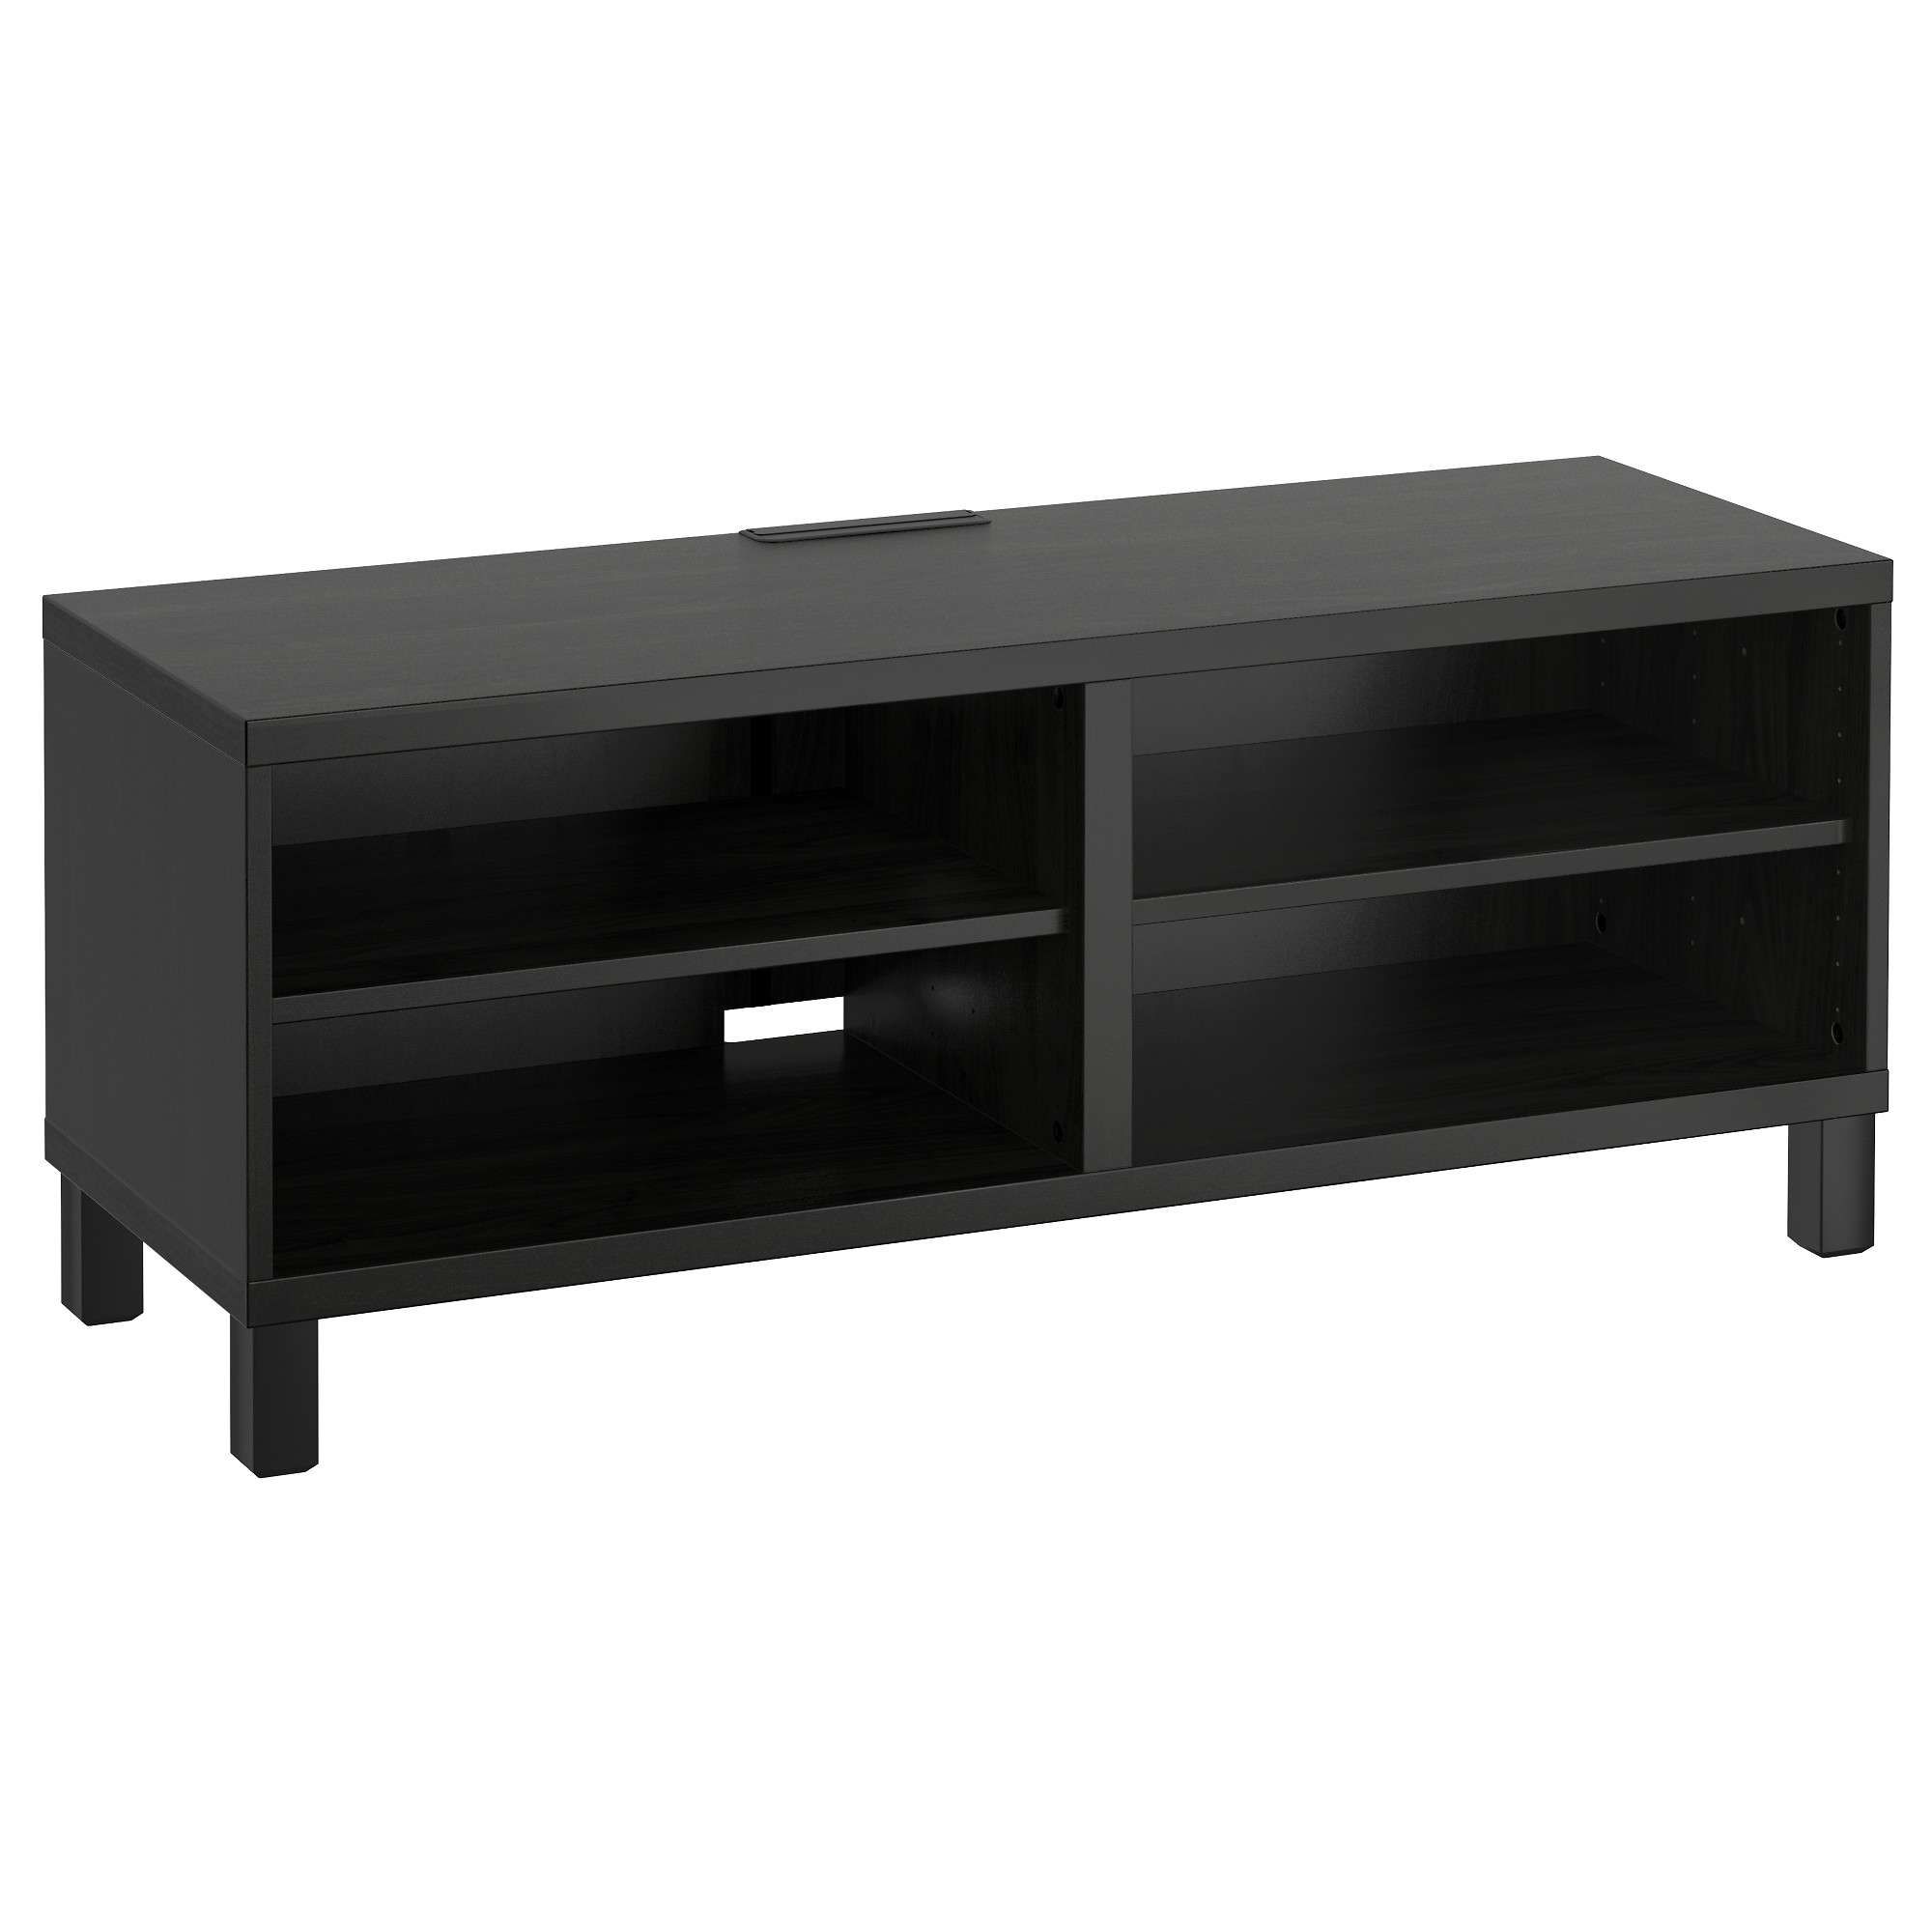 Large Tv Stands & Entertainment Centers – Ikea Regarding Tv Stands 40 Inches Wide (View 13 of 15)